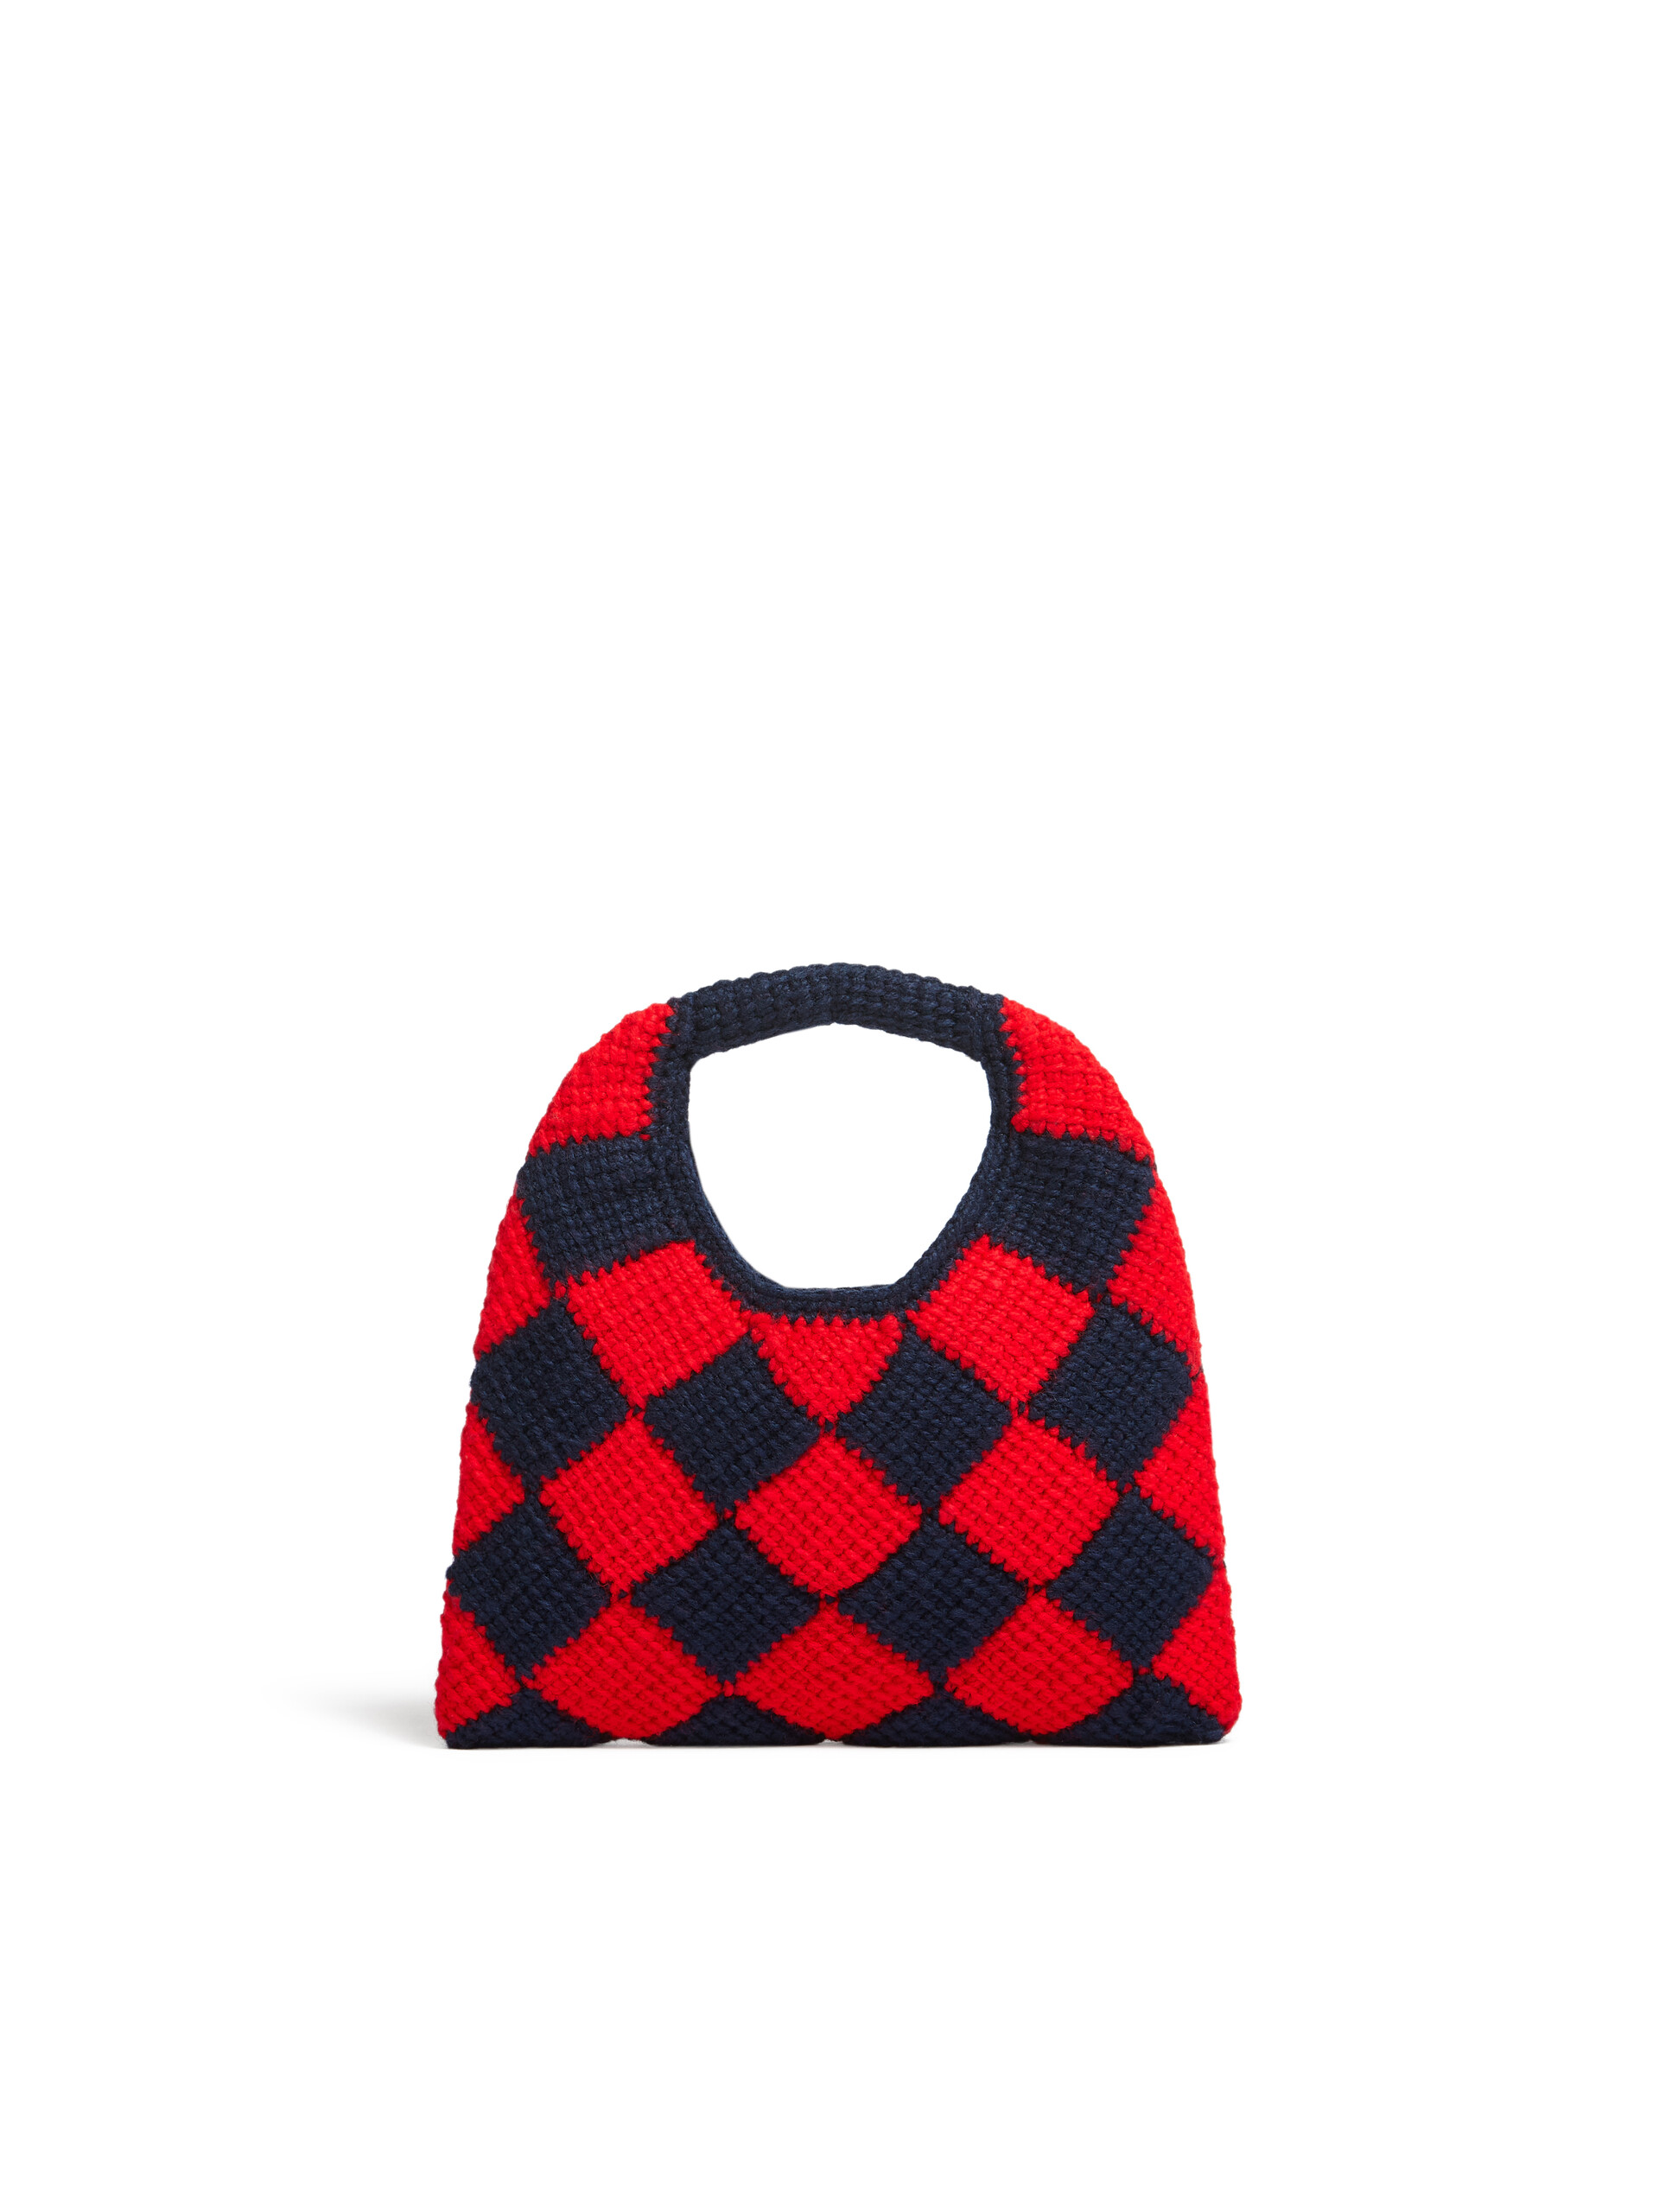 MARNI MARKET DIAMOND small bag in blue and red tech wool - Bags - Image 3